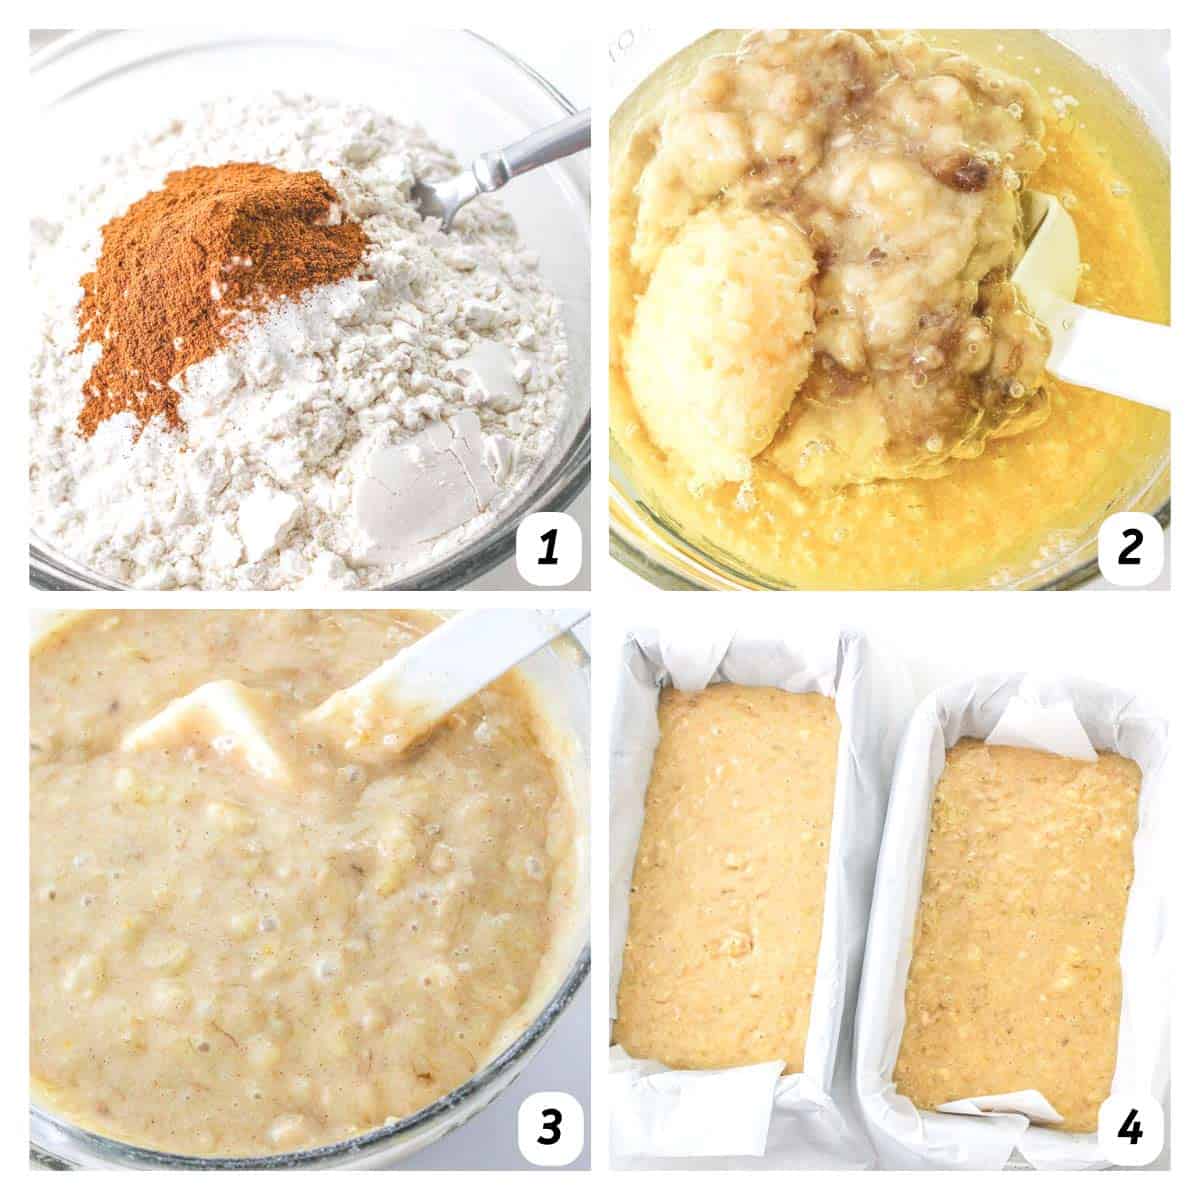 Four panel grid of process shots - combining dry and wet ingredients separately, combining the two mixtures, placing in loaf pans, and baking.